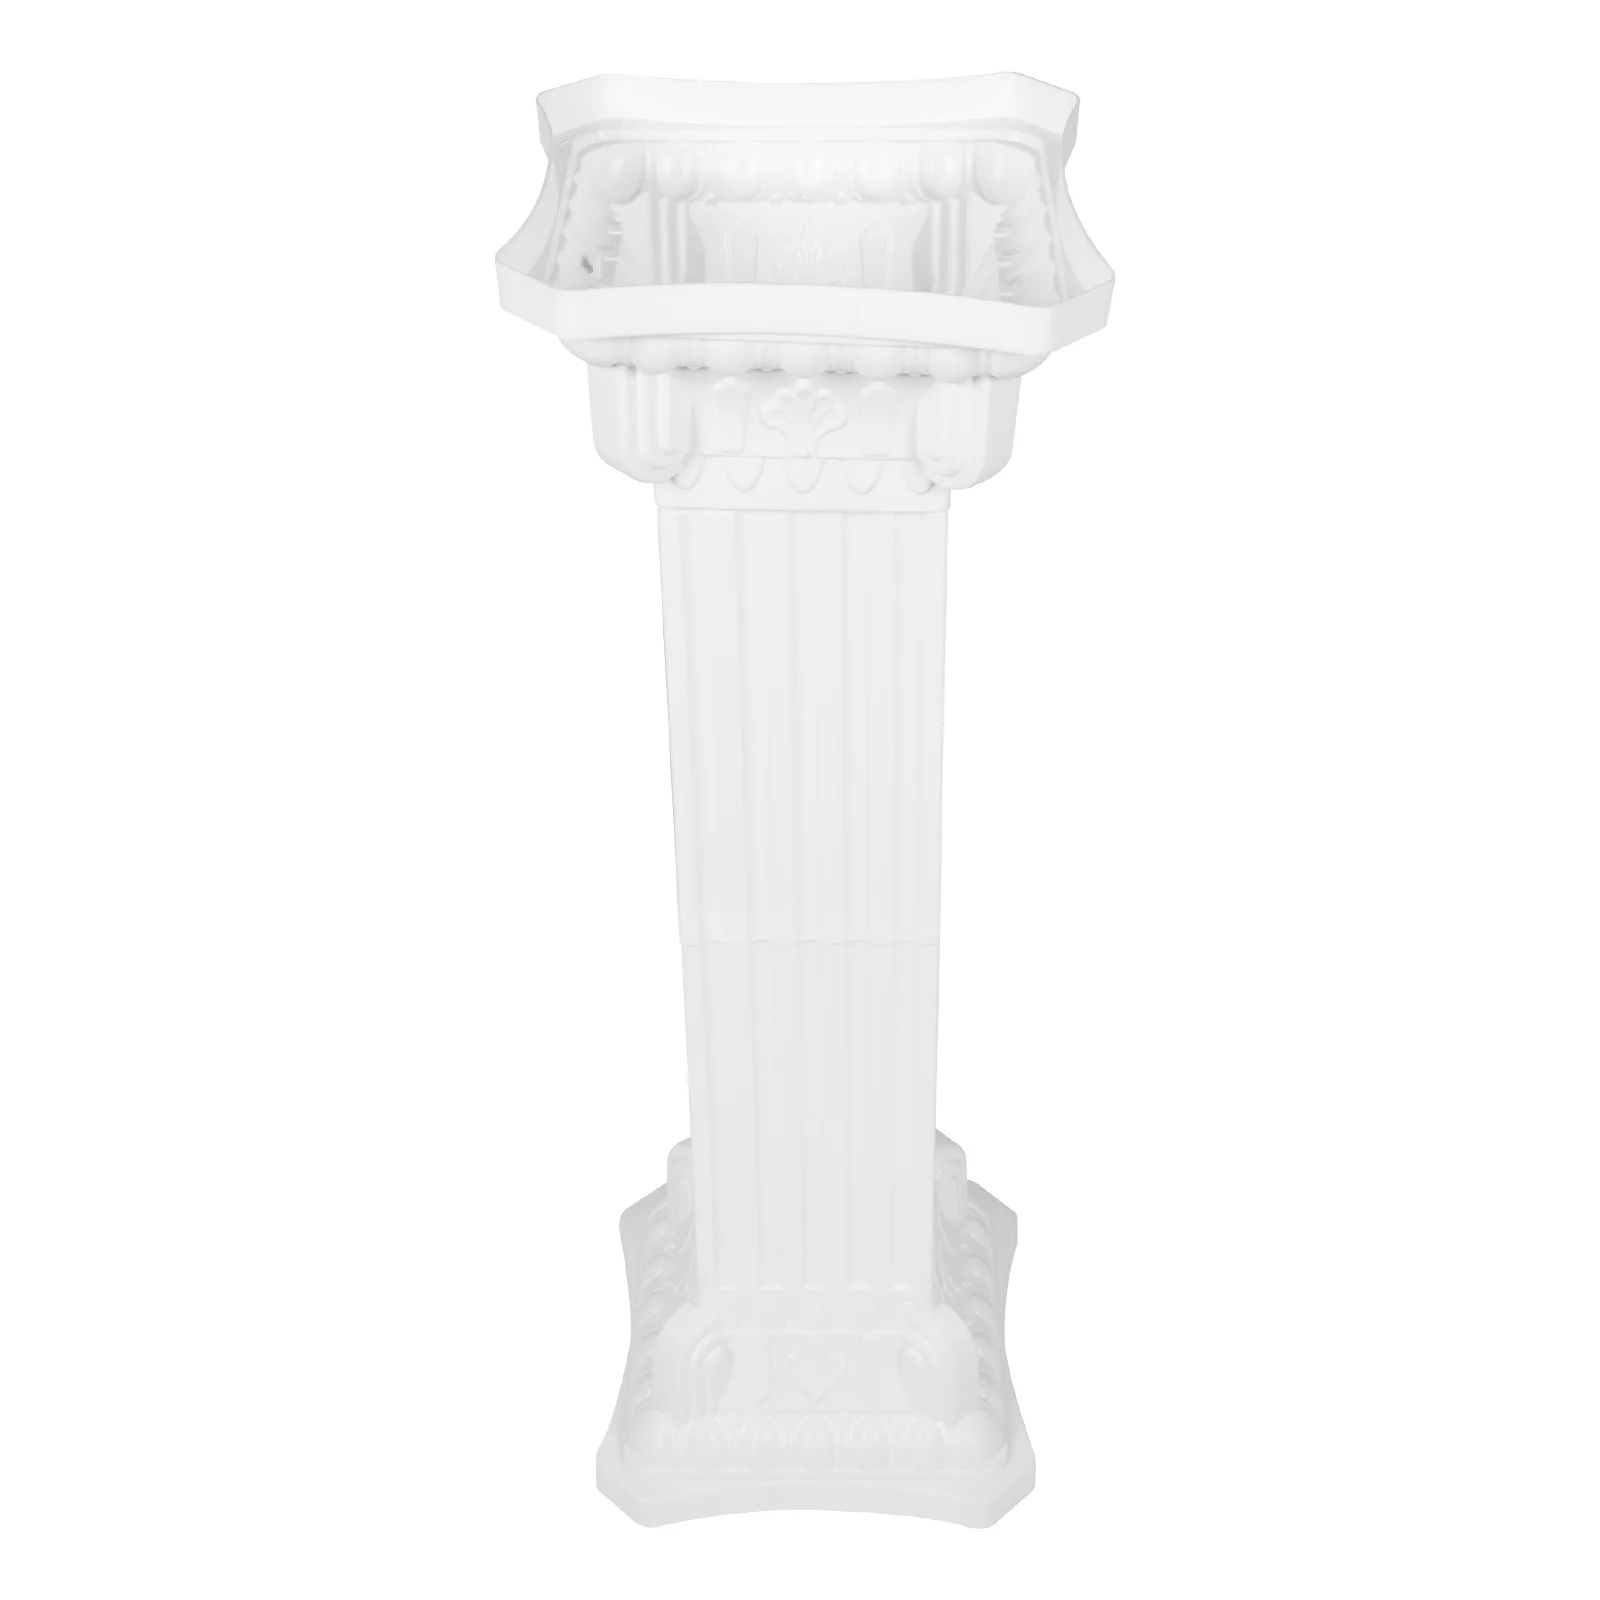 

Roman Column Wedding Road Guide Pillar Guiding Adornment Artistic Statue Plastic Party Supply Flower Pots Outdoors Marriage